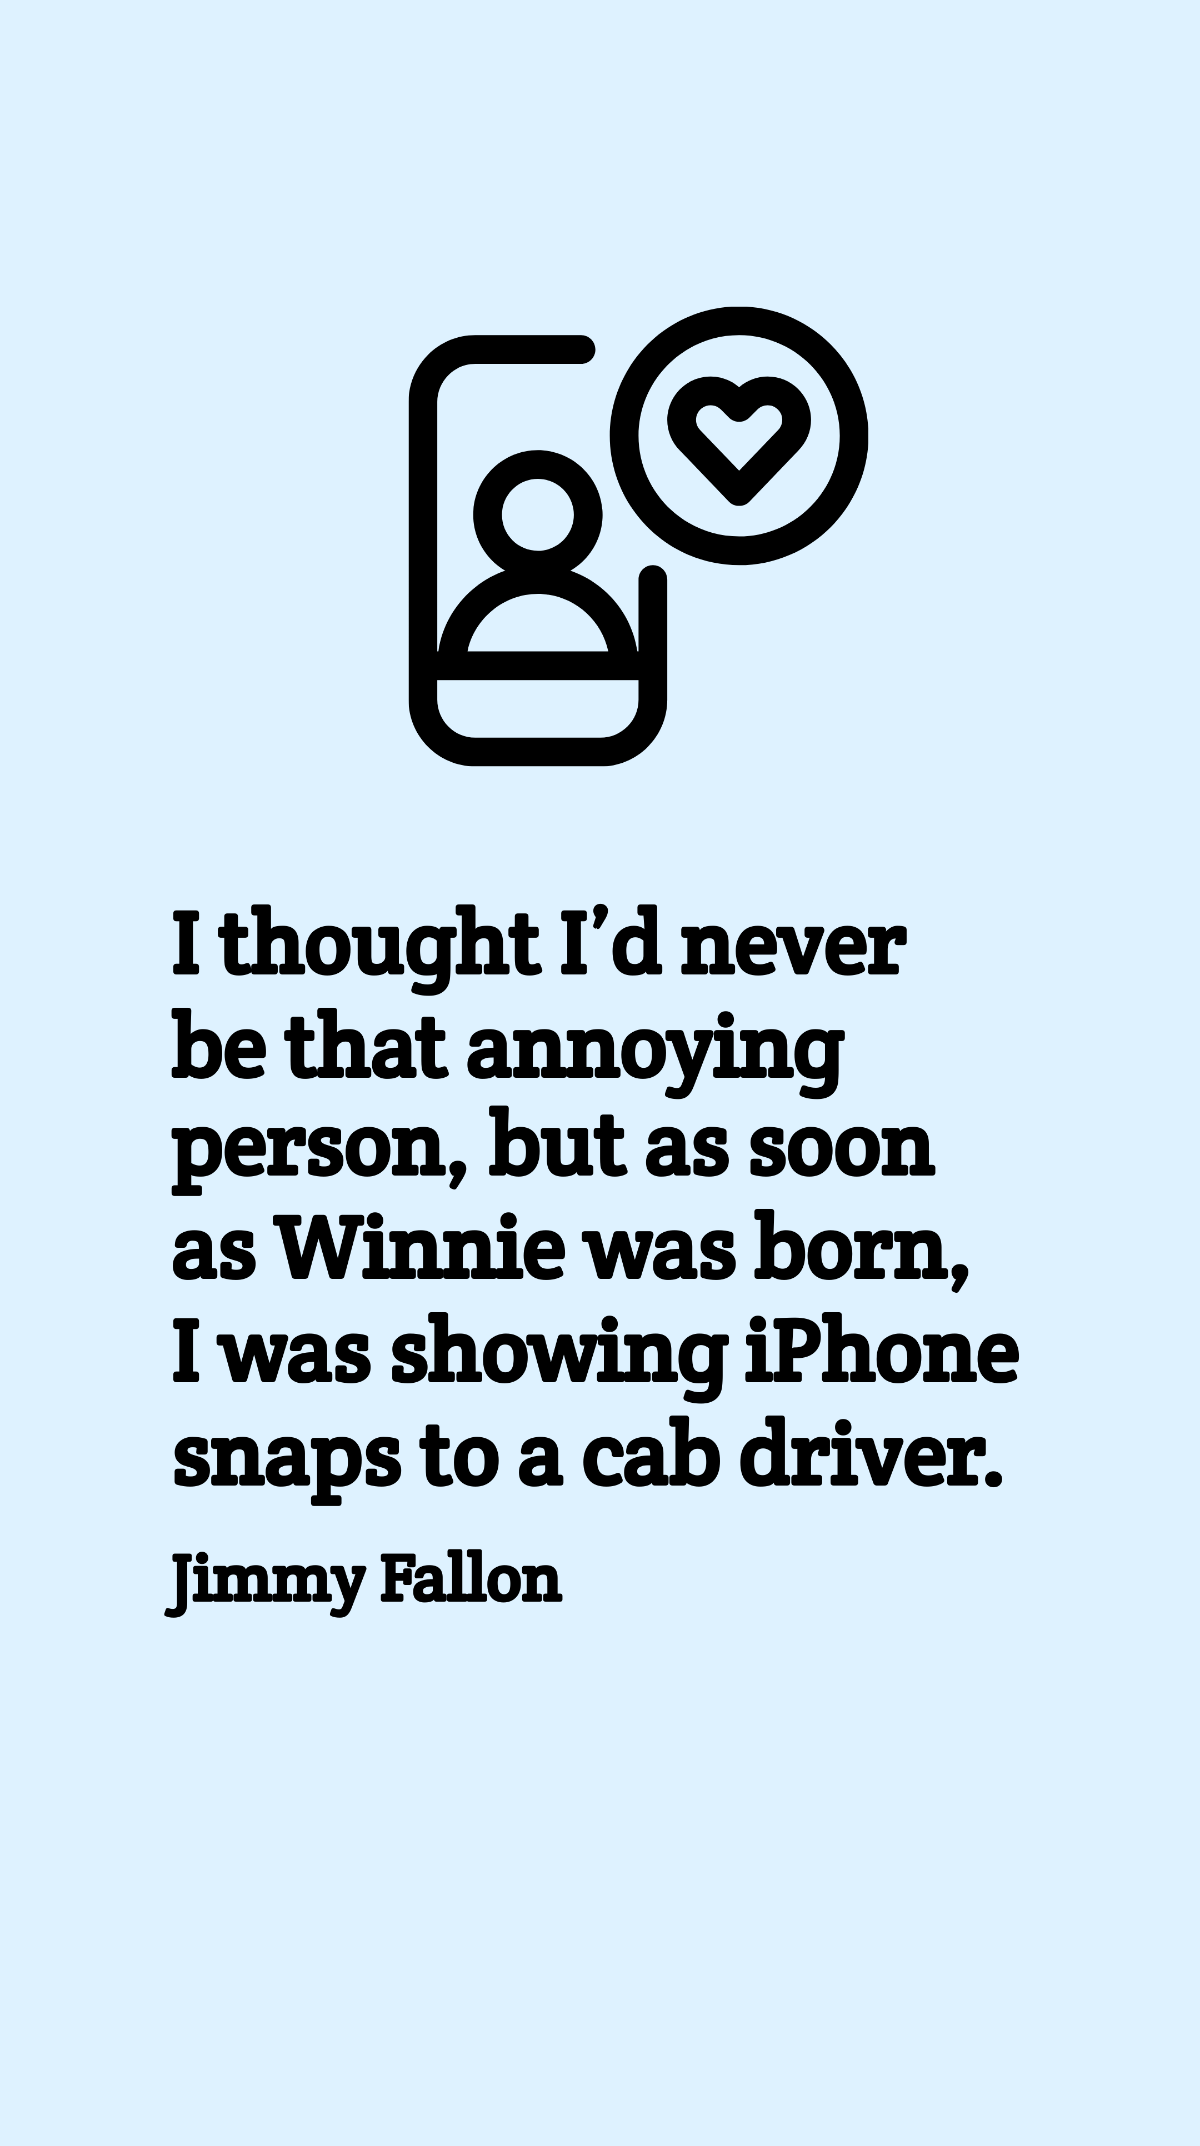 Free Jimmy Fallon - I thought I’d never be that annoying person, but as soon as Winnie was born, I was showing iPhone snaps to a cab driver. Template